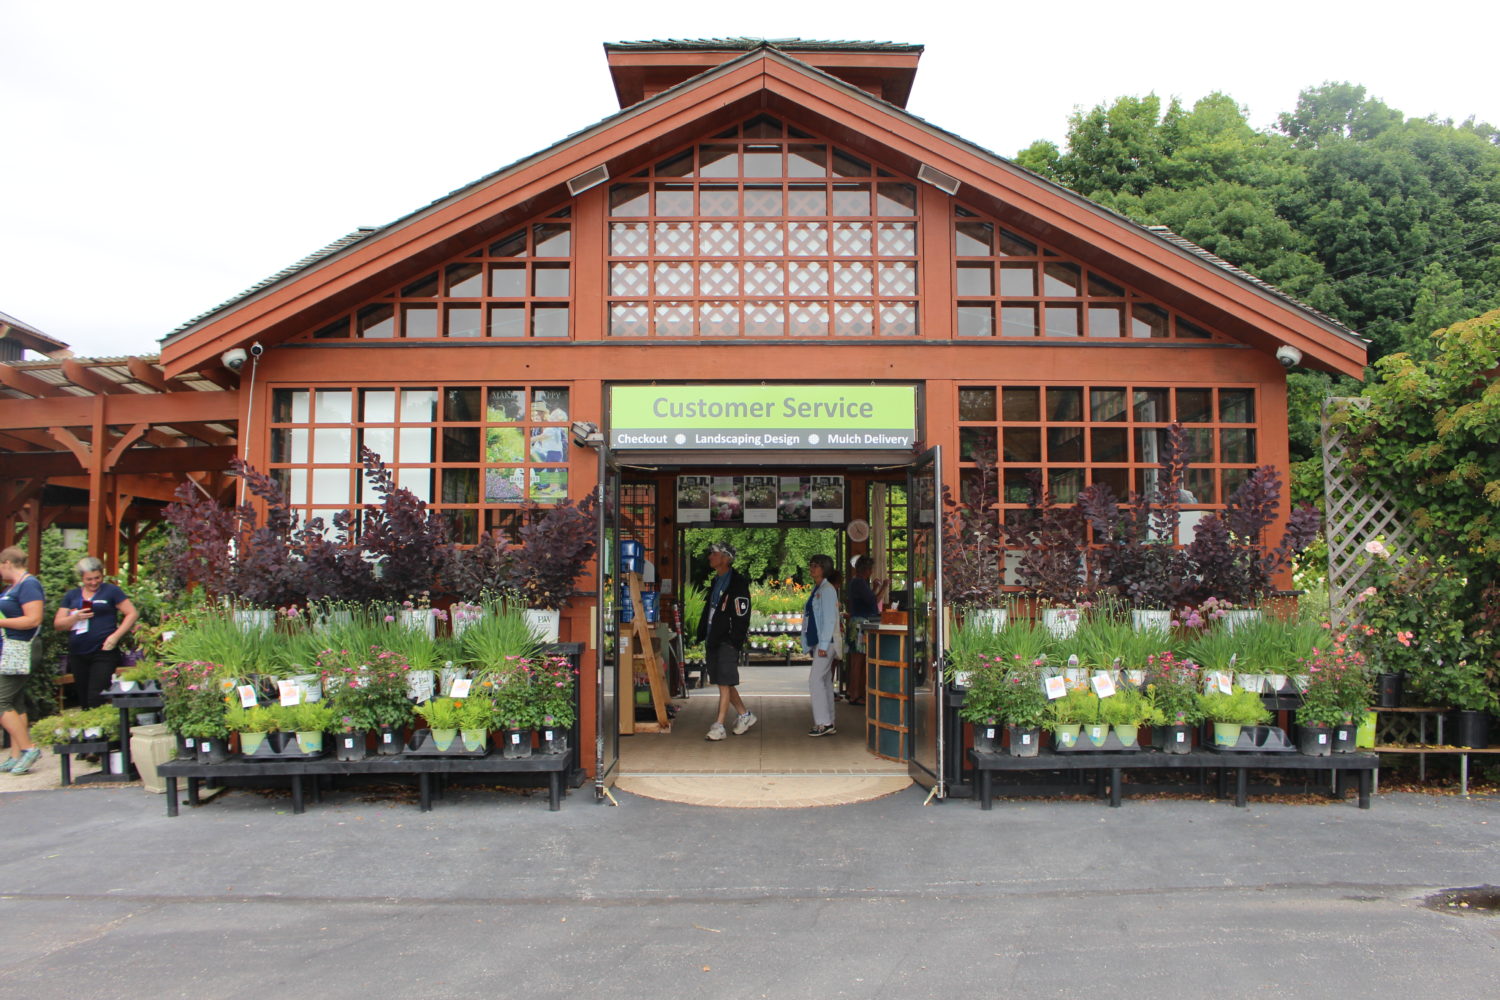 Caan Floral & Greenhouses customer service